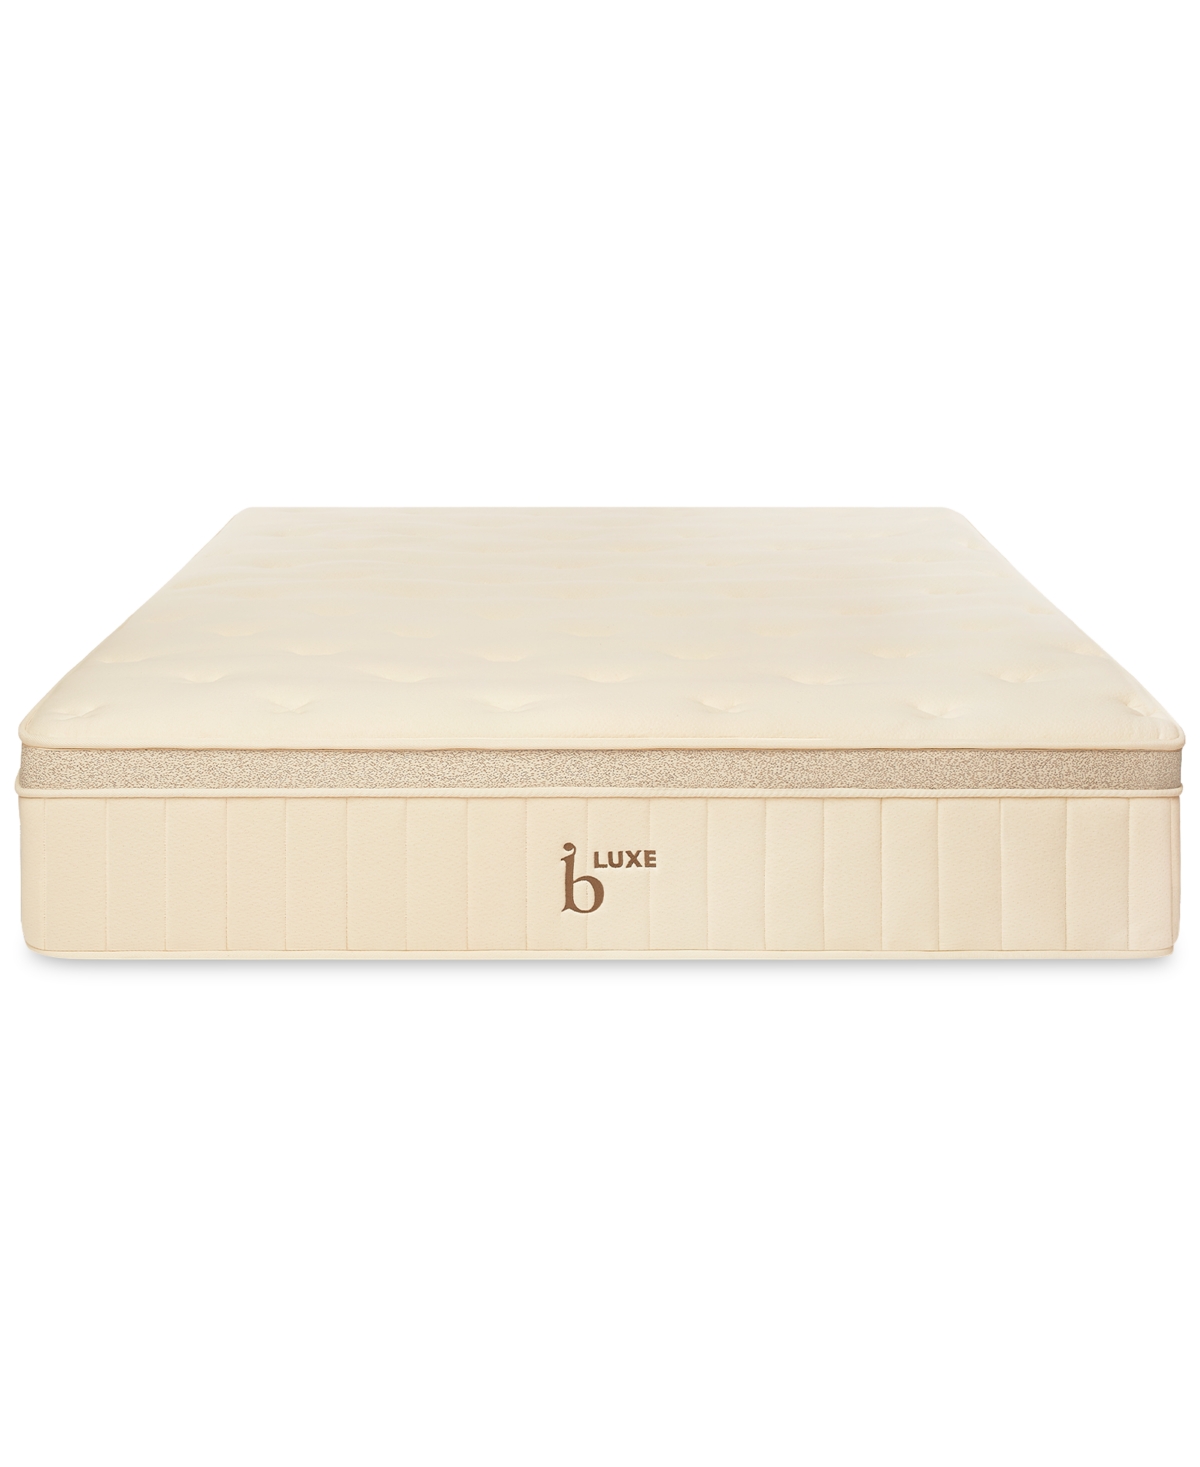 Brooklyn Bedding Birch Luxe Natural 11.5" Mattress In No Color